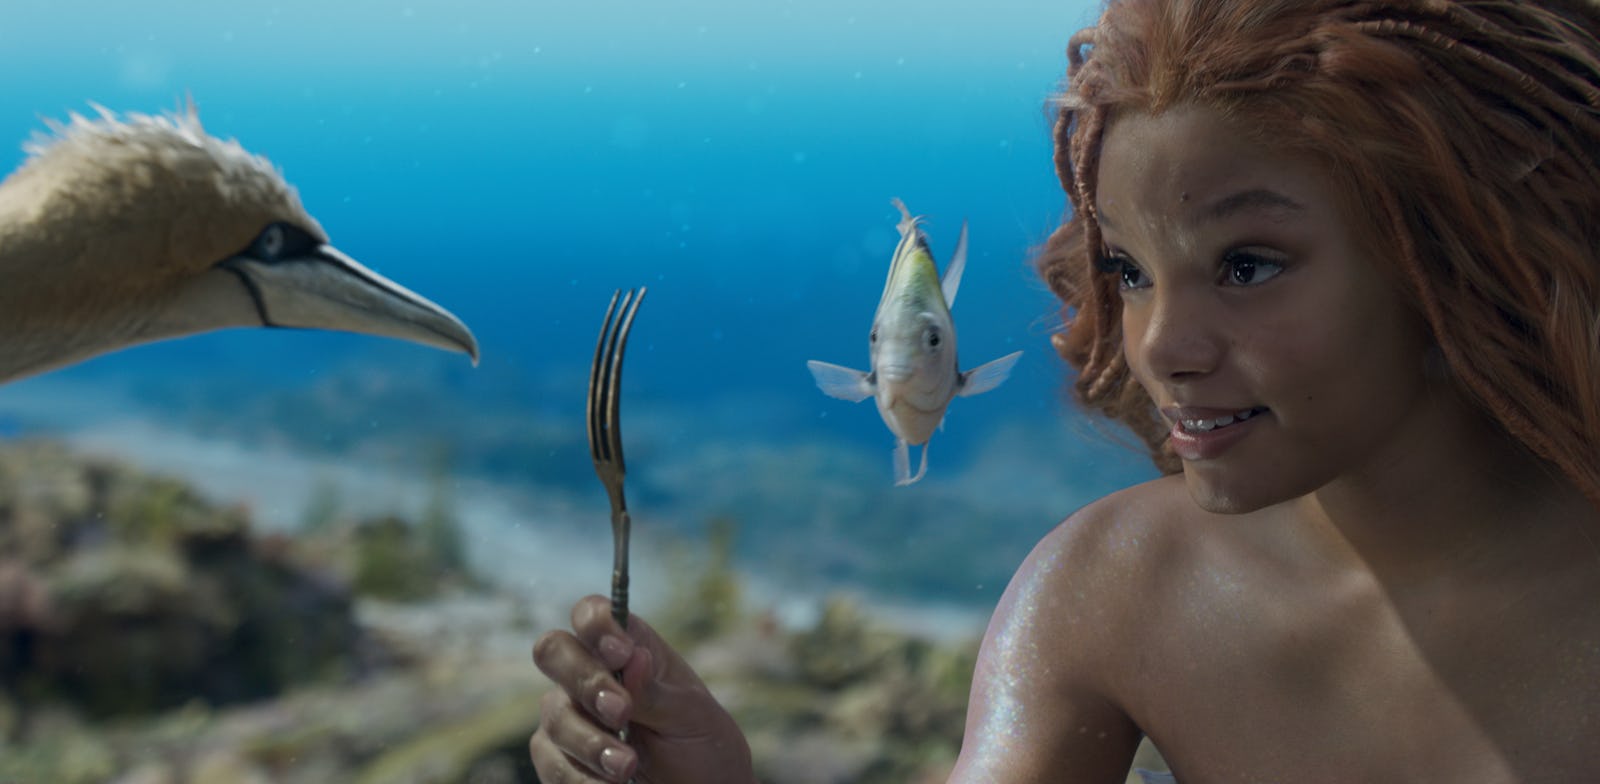 How To Stream 'The Little Mermaid' Is The LiveAction Movie On Disney+?